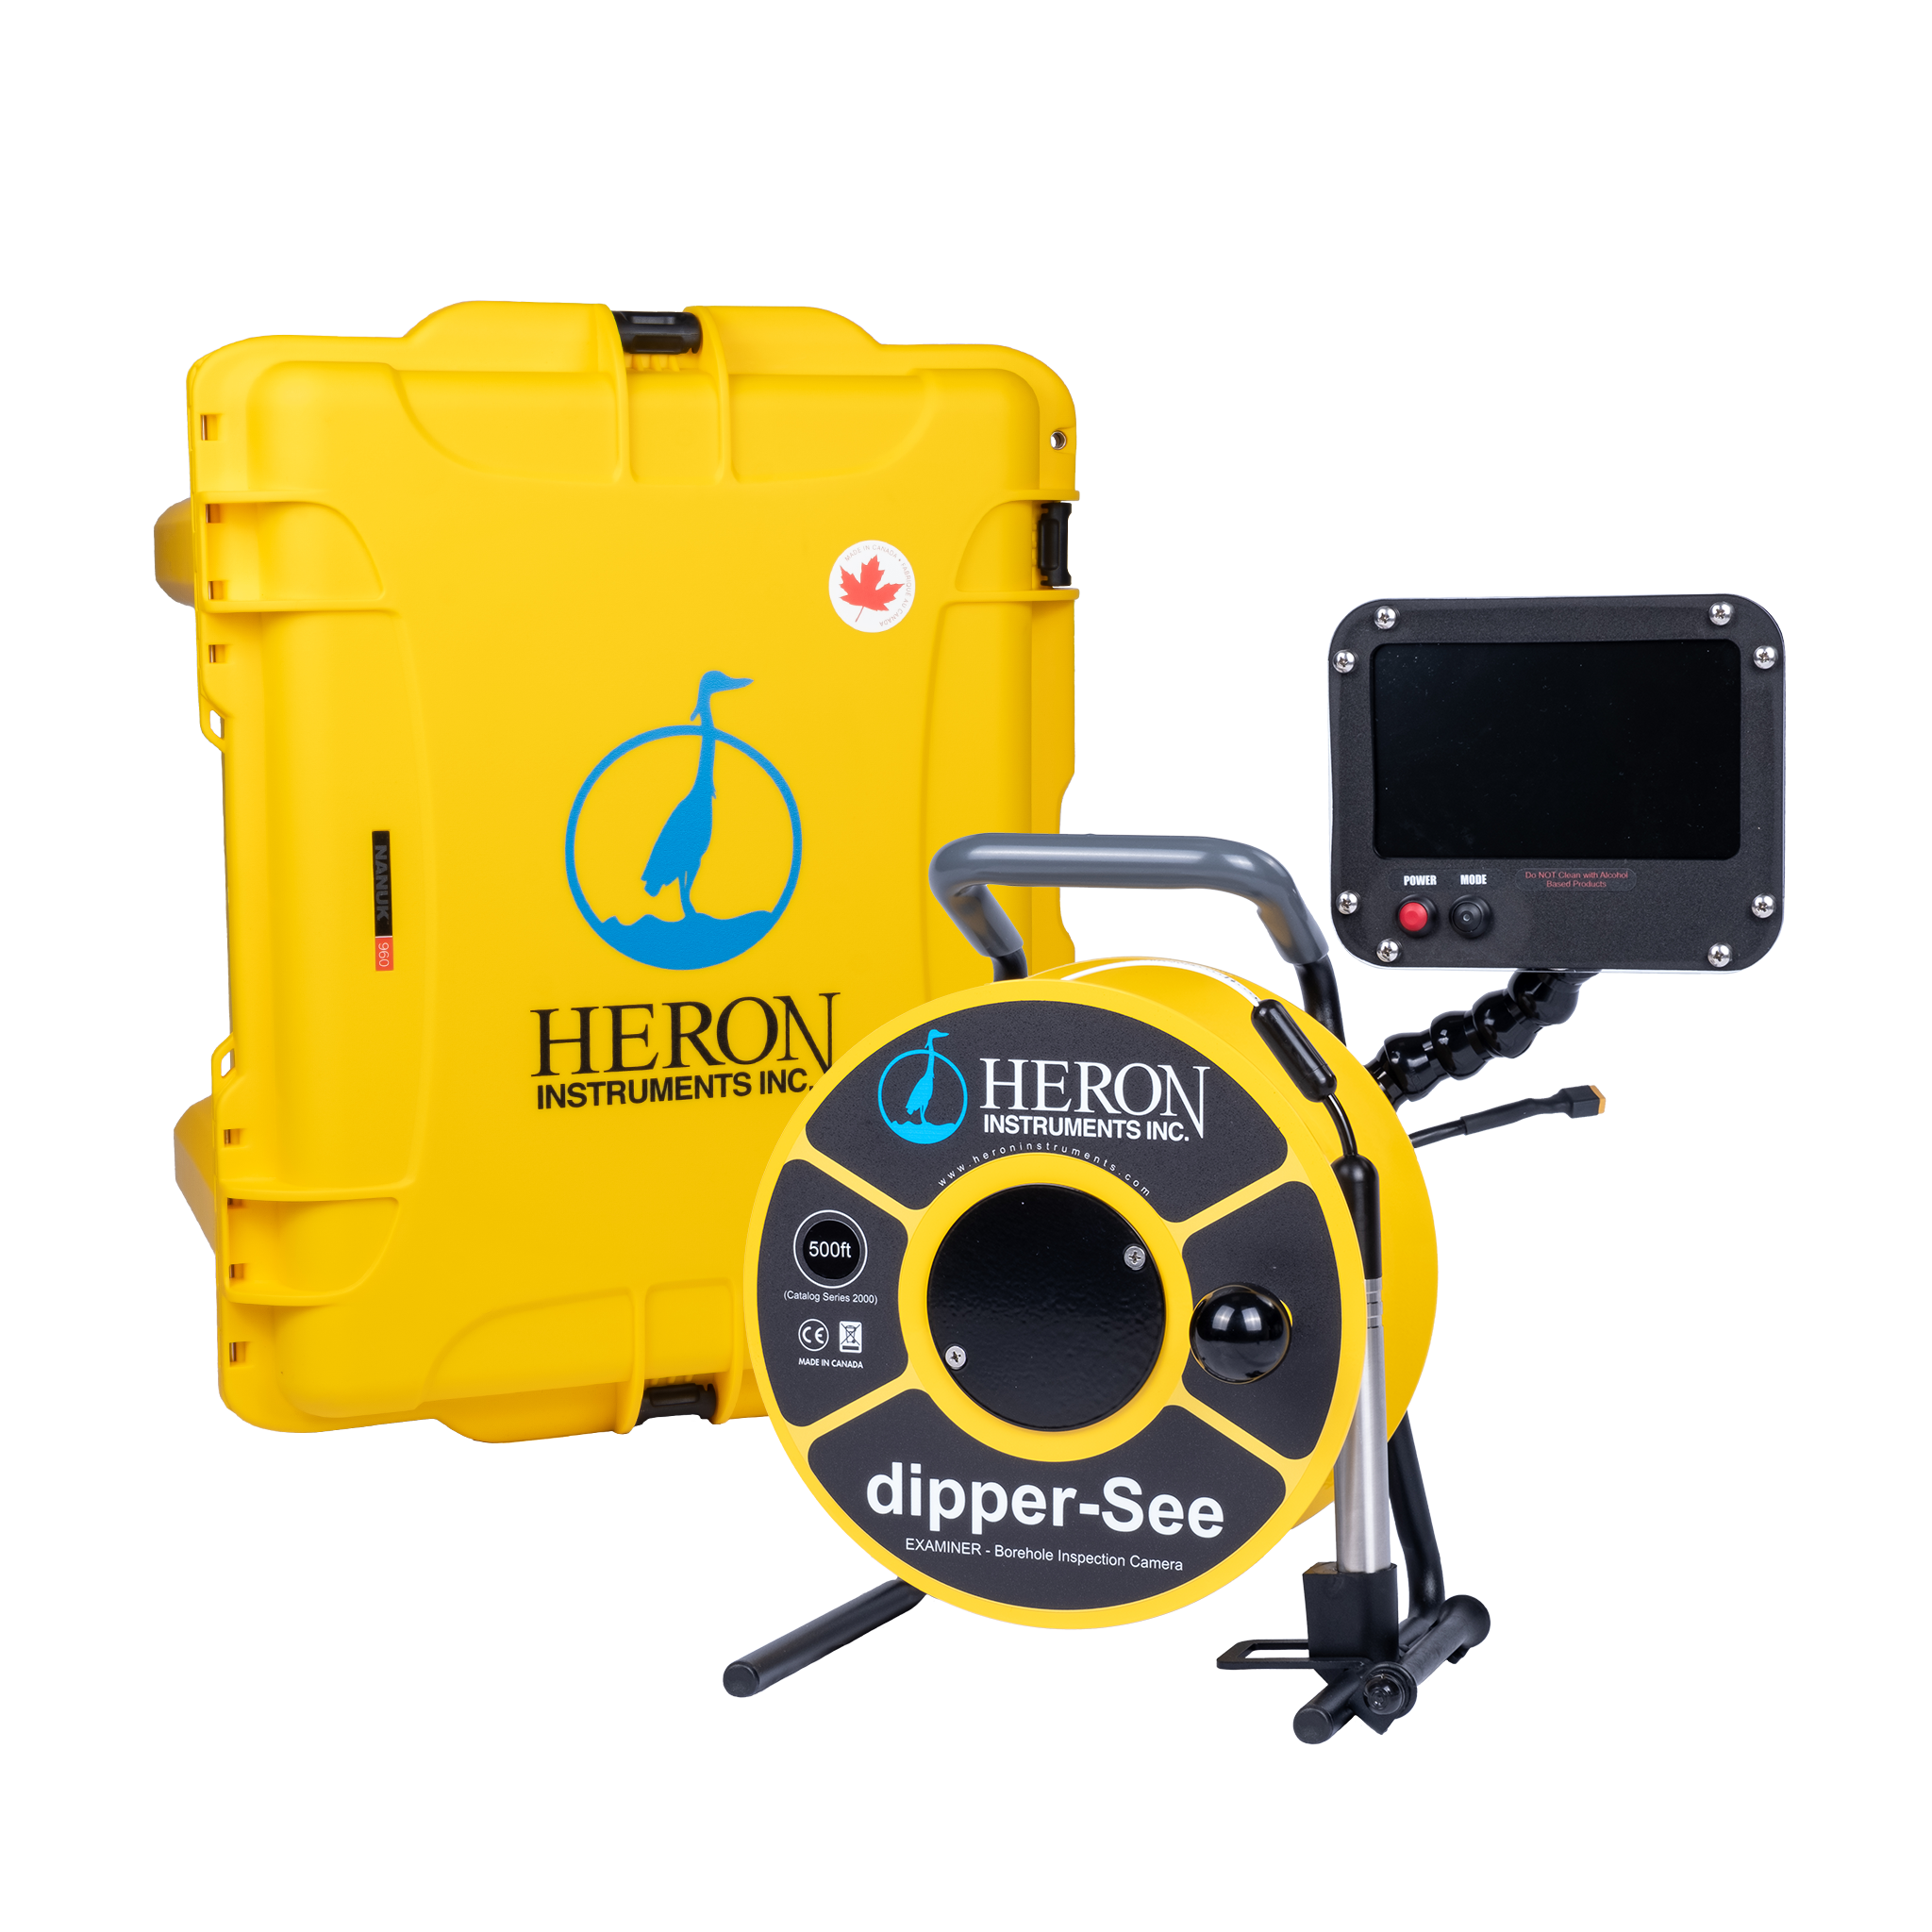 dipper-See EXAMINER  Cost-Effective Borehole Inspection Camera